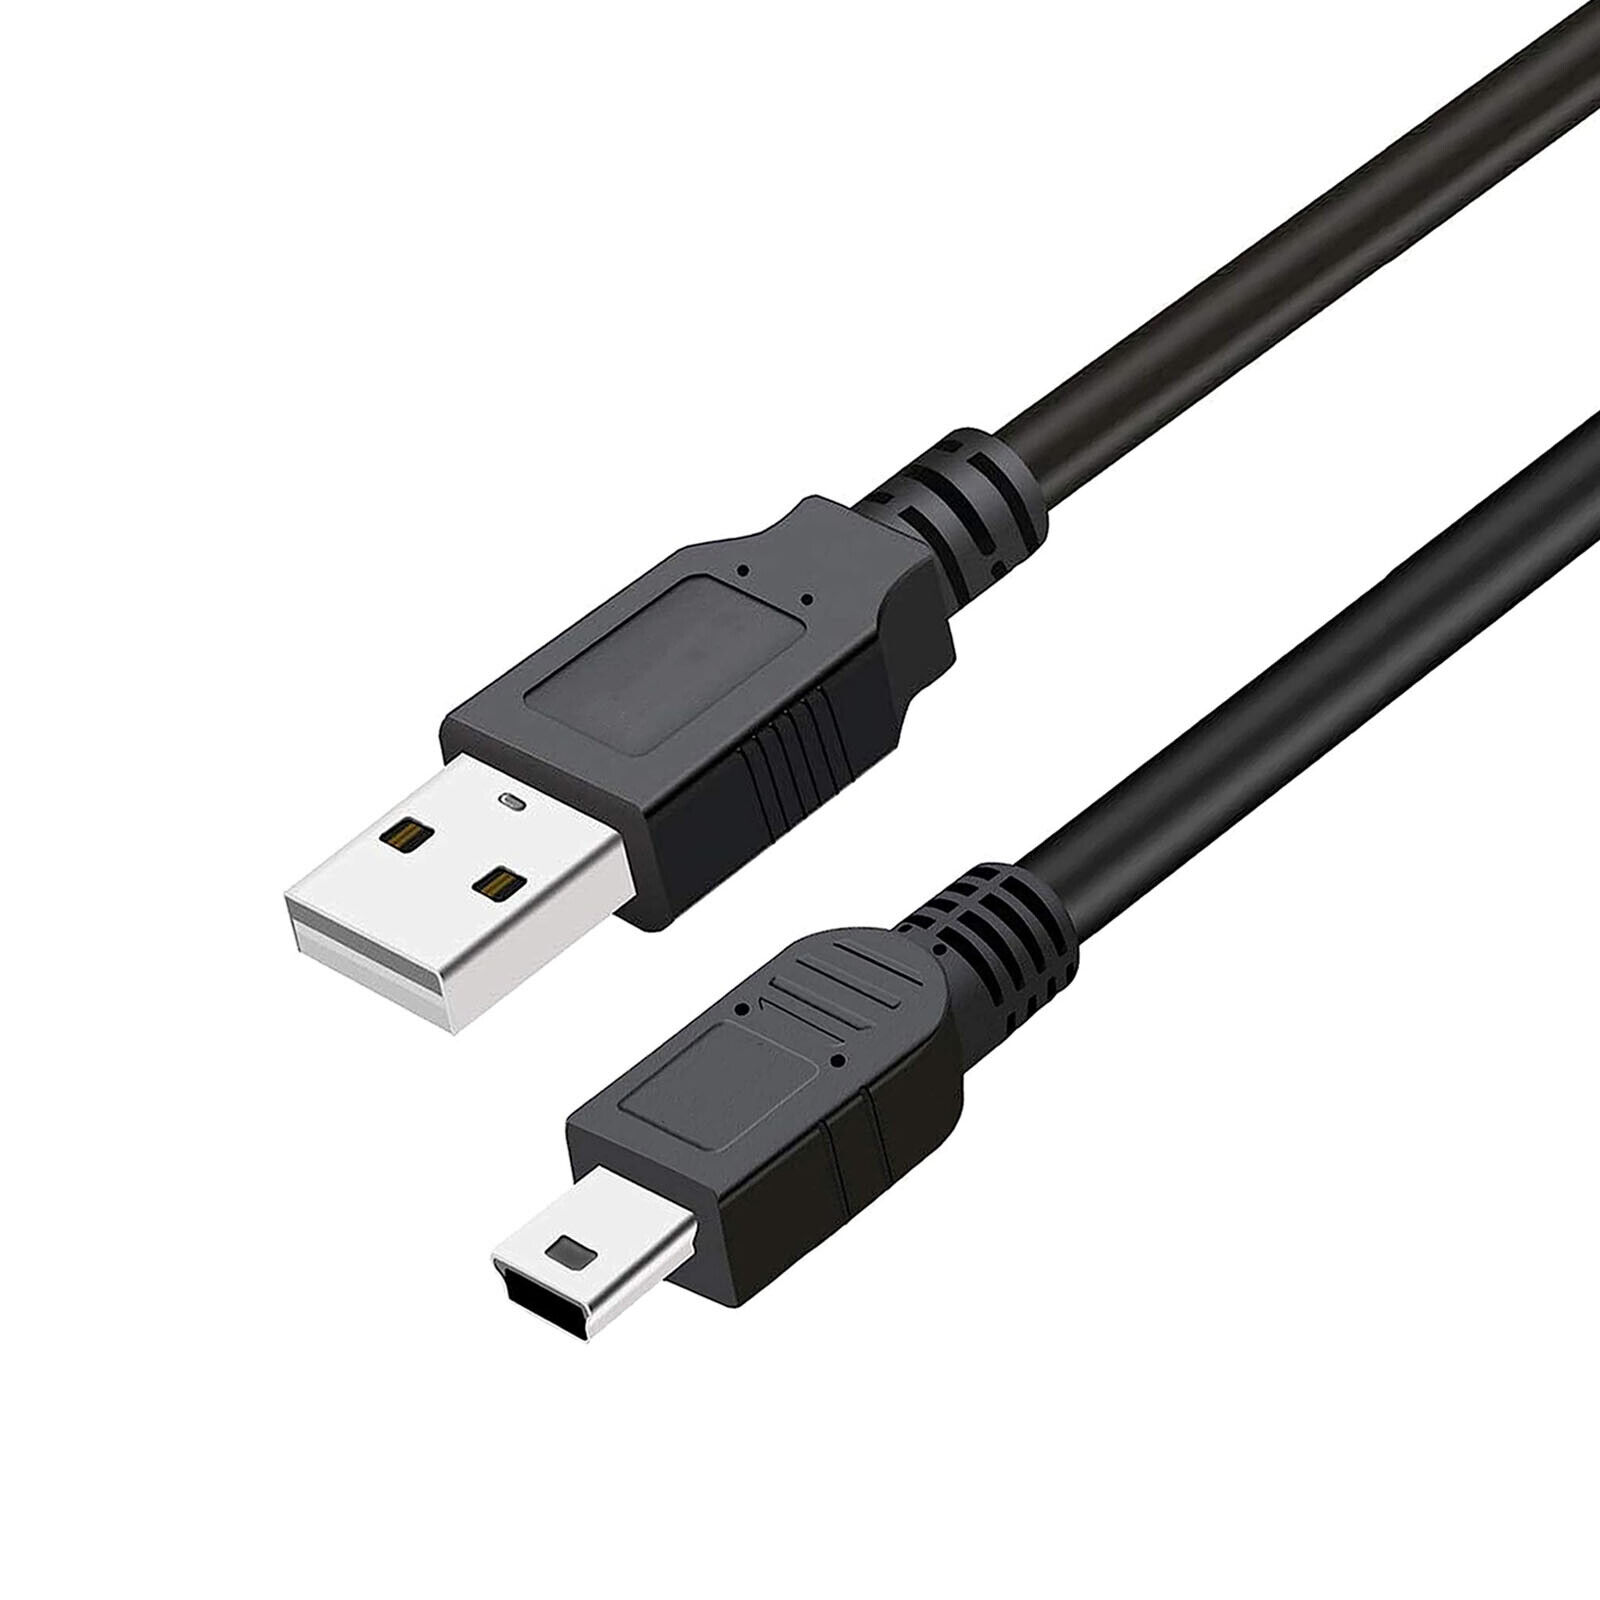 4ft Mini USB 2.0 Charging Data Cable Cord for Uniden BCD436HP Handheld Scanner